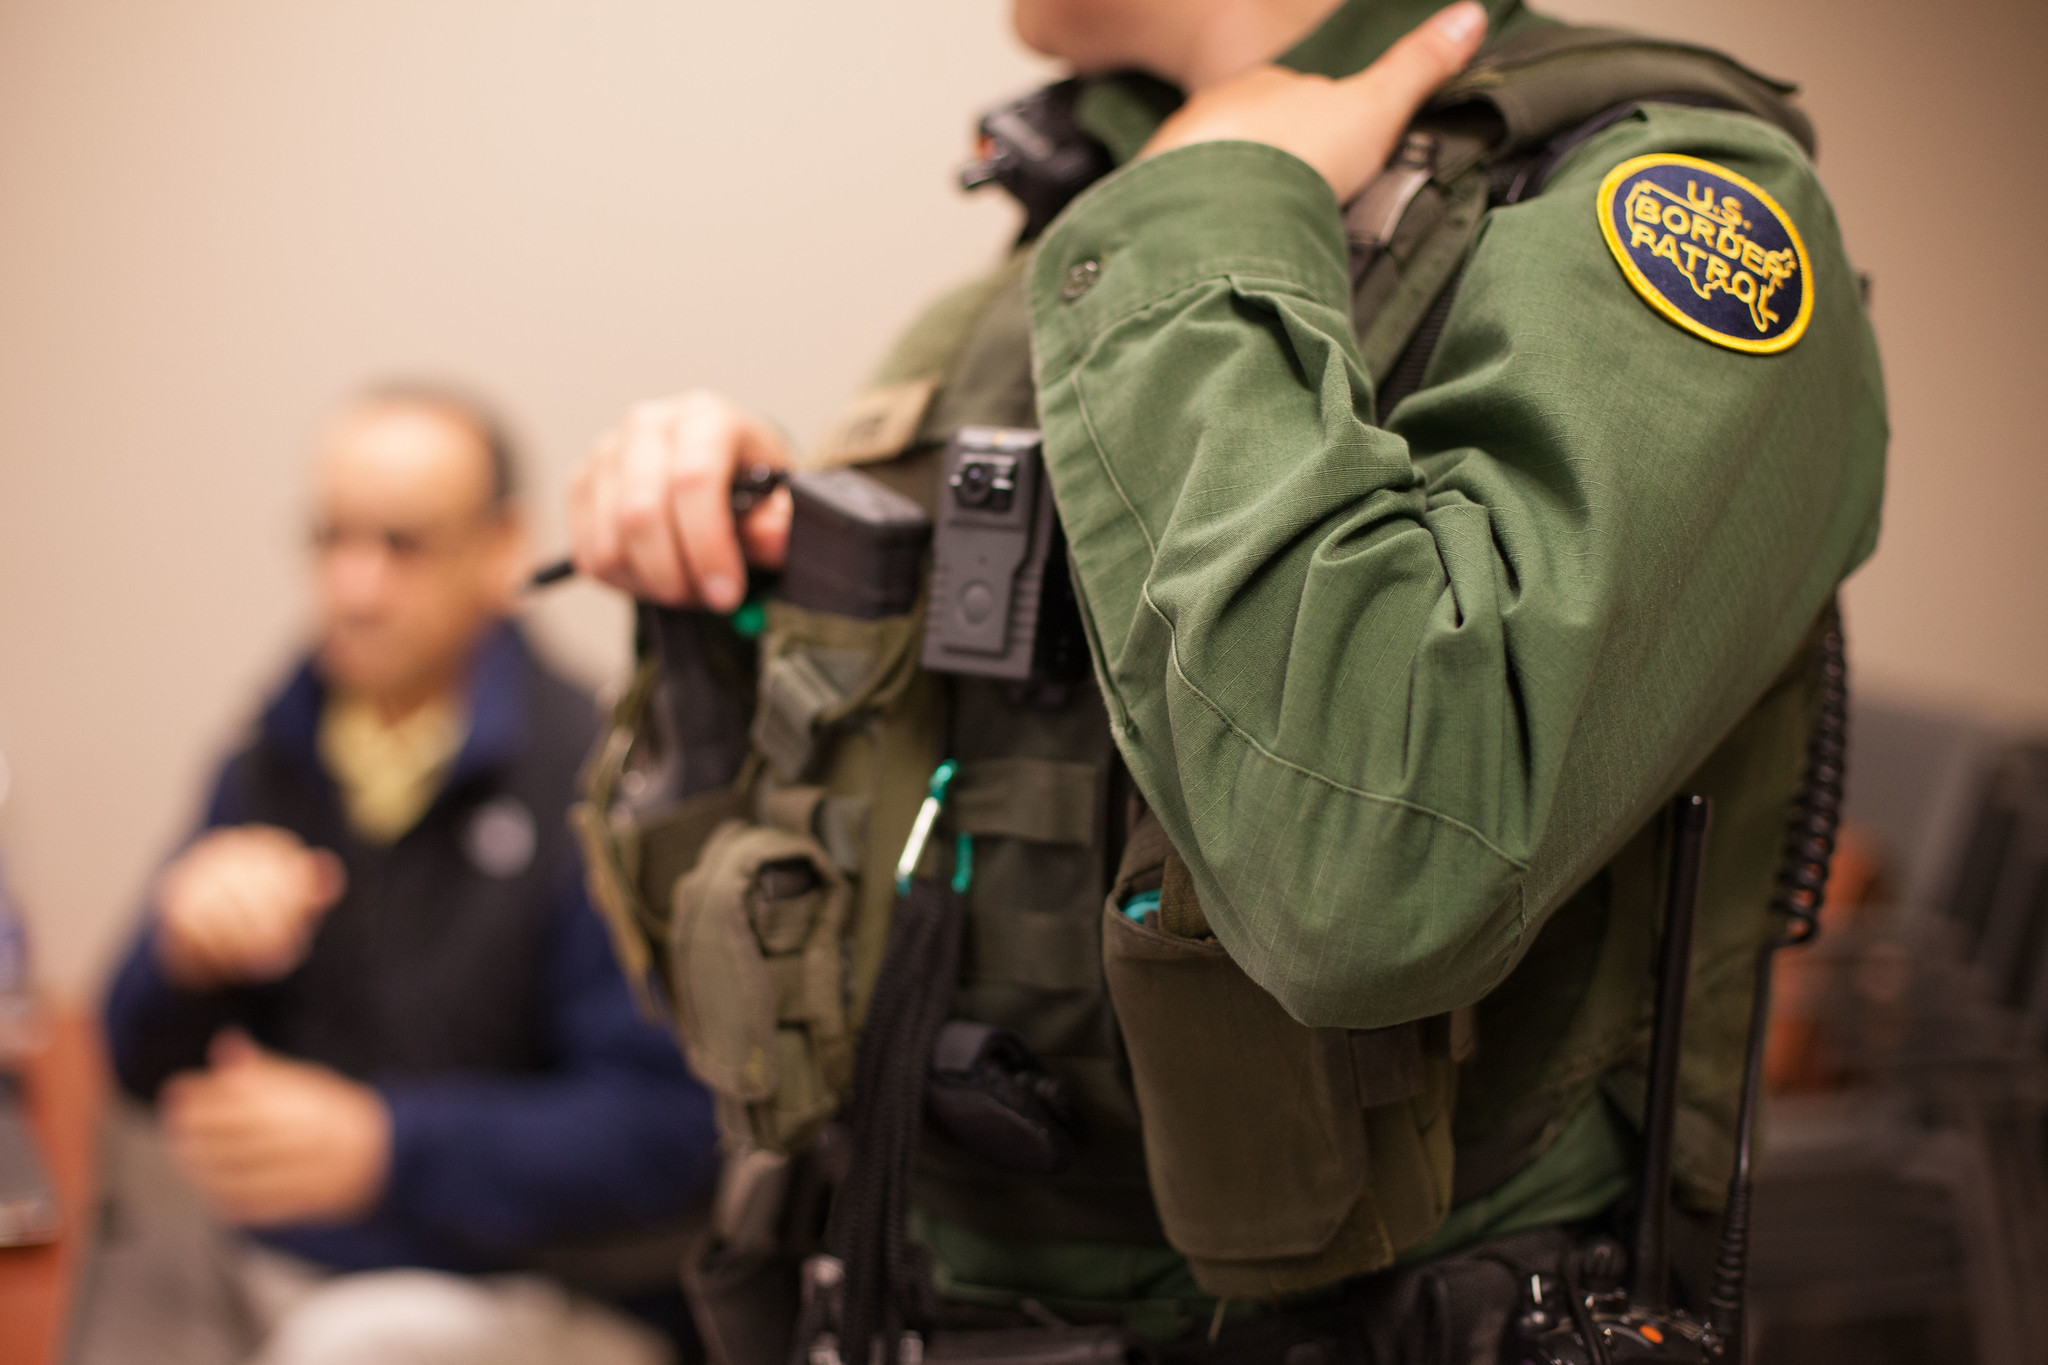 Yet, Border Patrol agents routinely violate people’s rights and exceed the ...